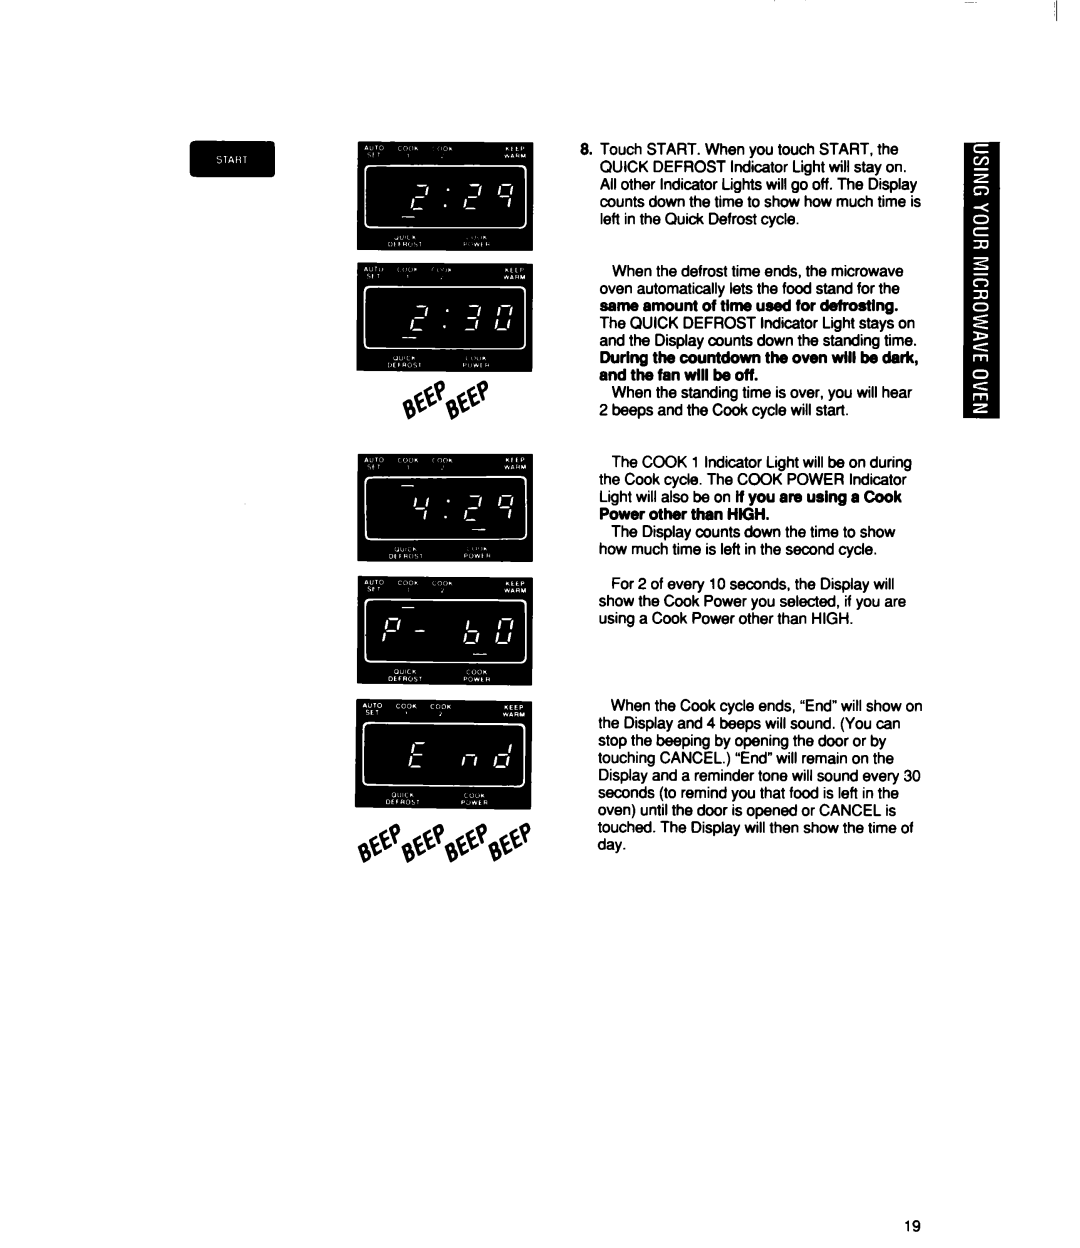 Whirlpool MT2100XY user manual When the standing time is over, you will hear 